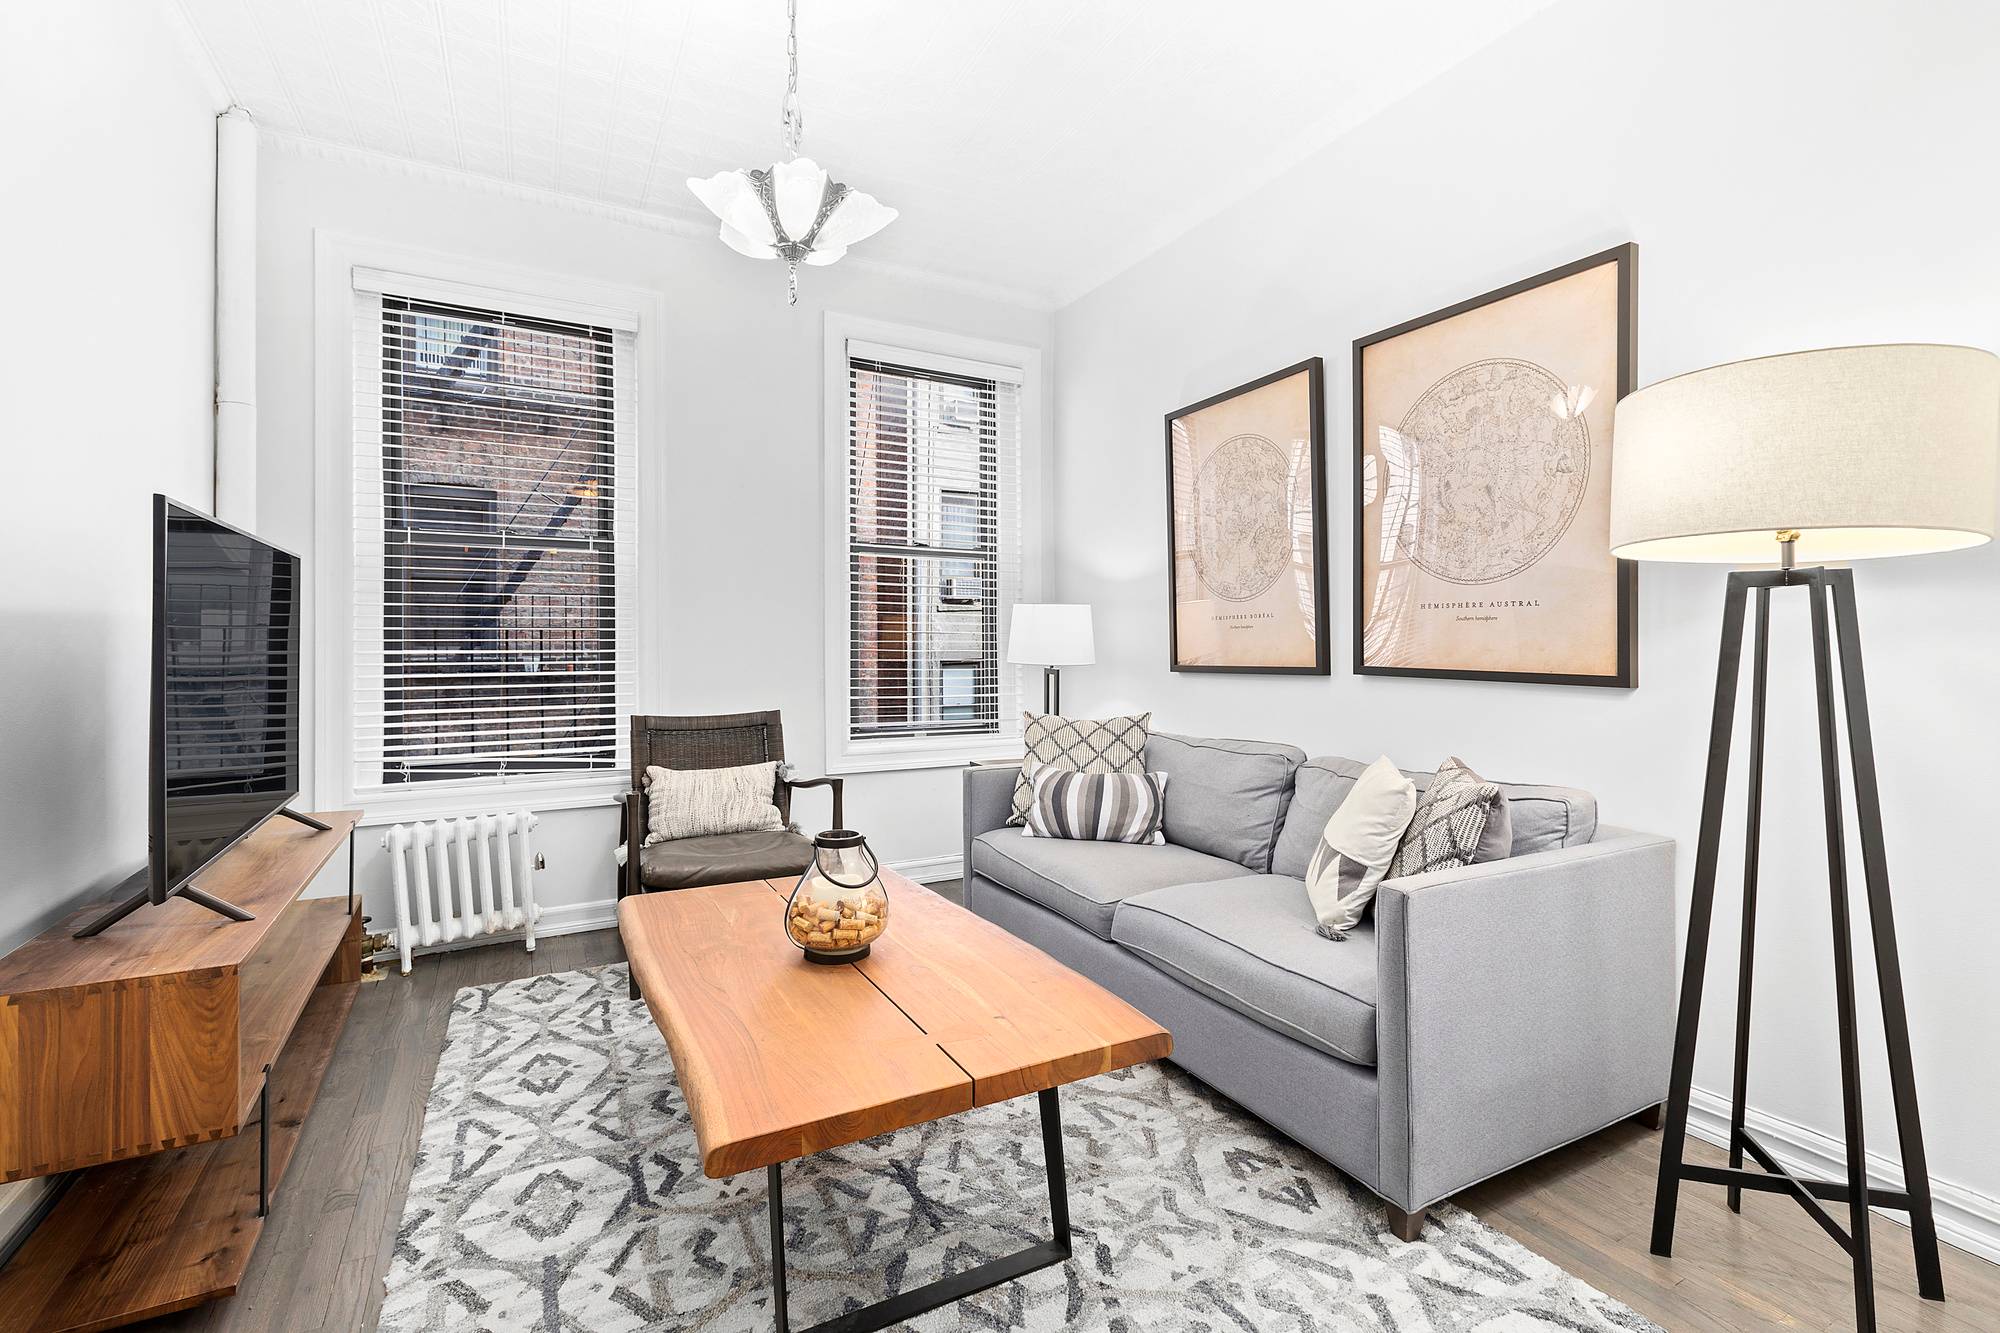 PURCHASE CASH ONLY ! 131 Thompson Street, 3C is a cozy two bed apartment in an Elevator Building located on a quiet street in Soho, minutes away from the best ...